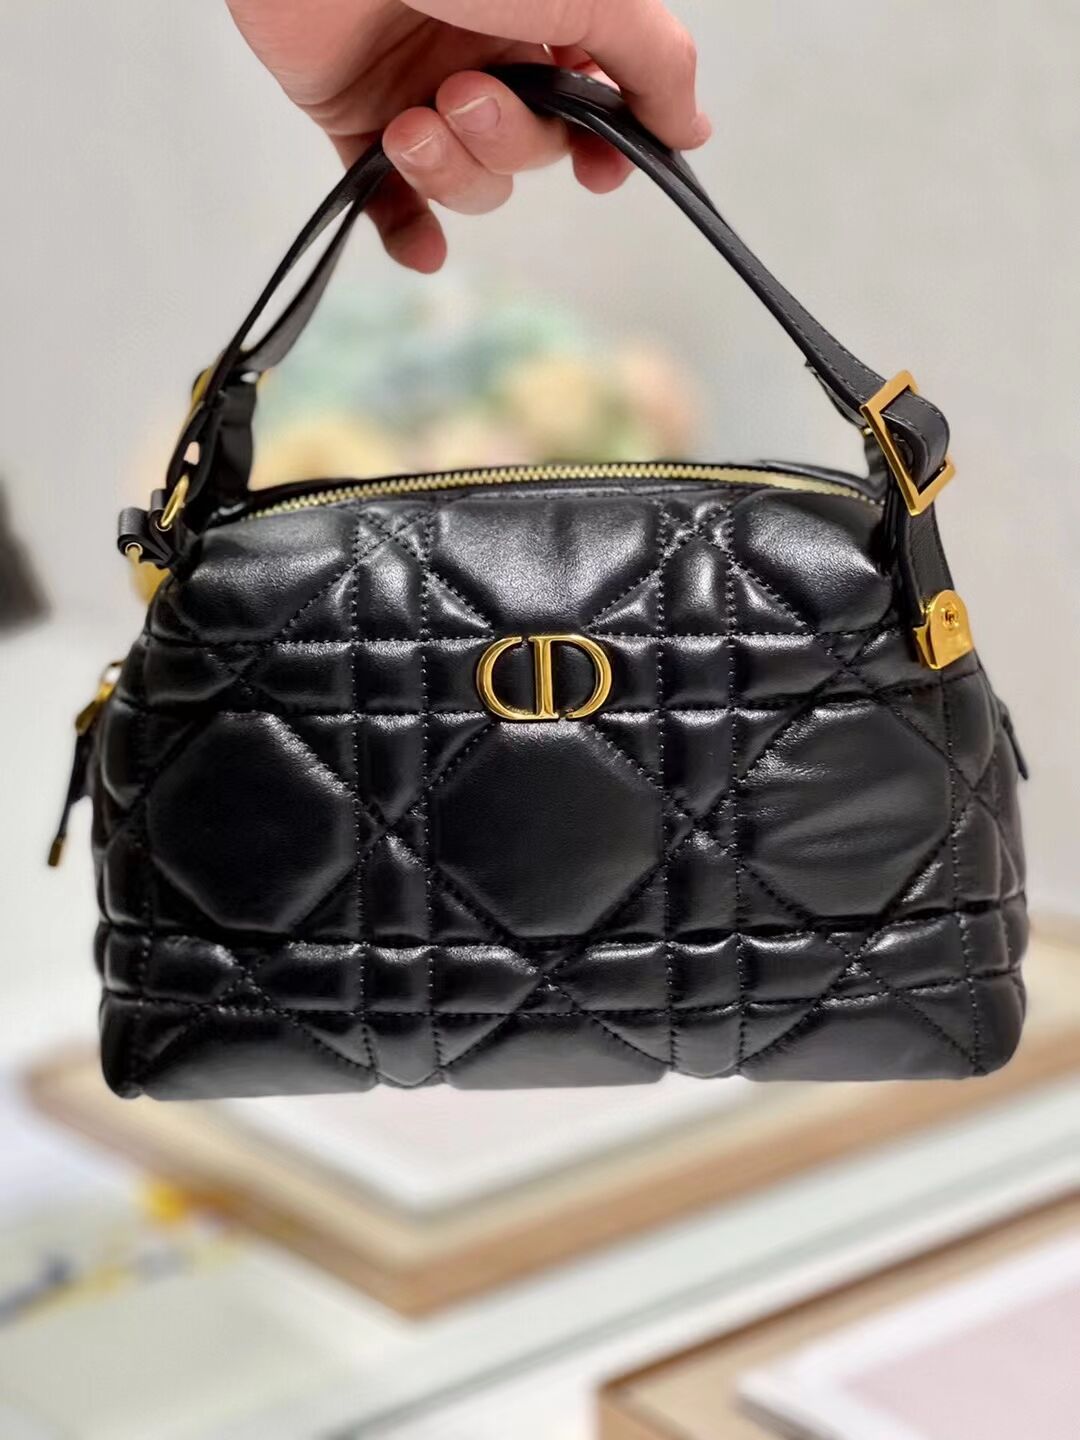 LADY DIOR TOP HANDLE SMALL BAG Latte Cannage Lambskin C0655 BLACK